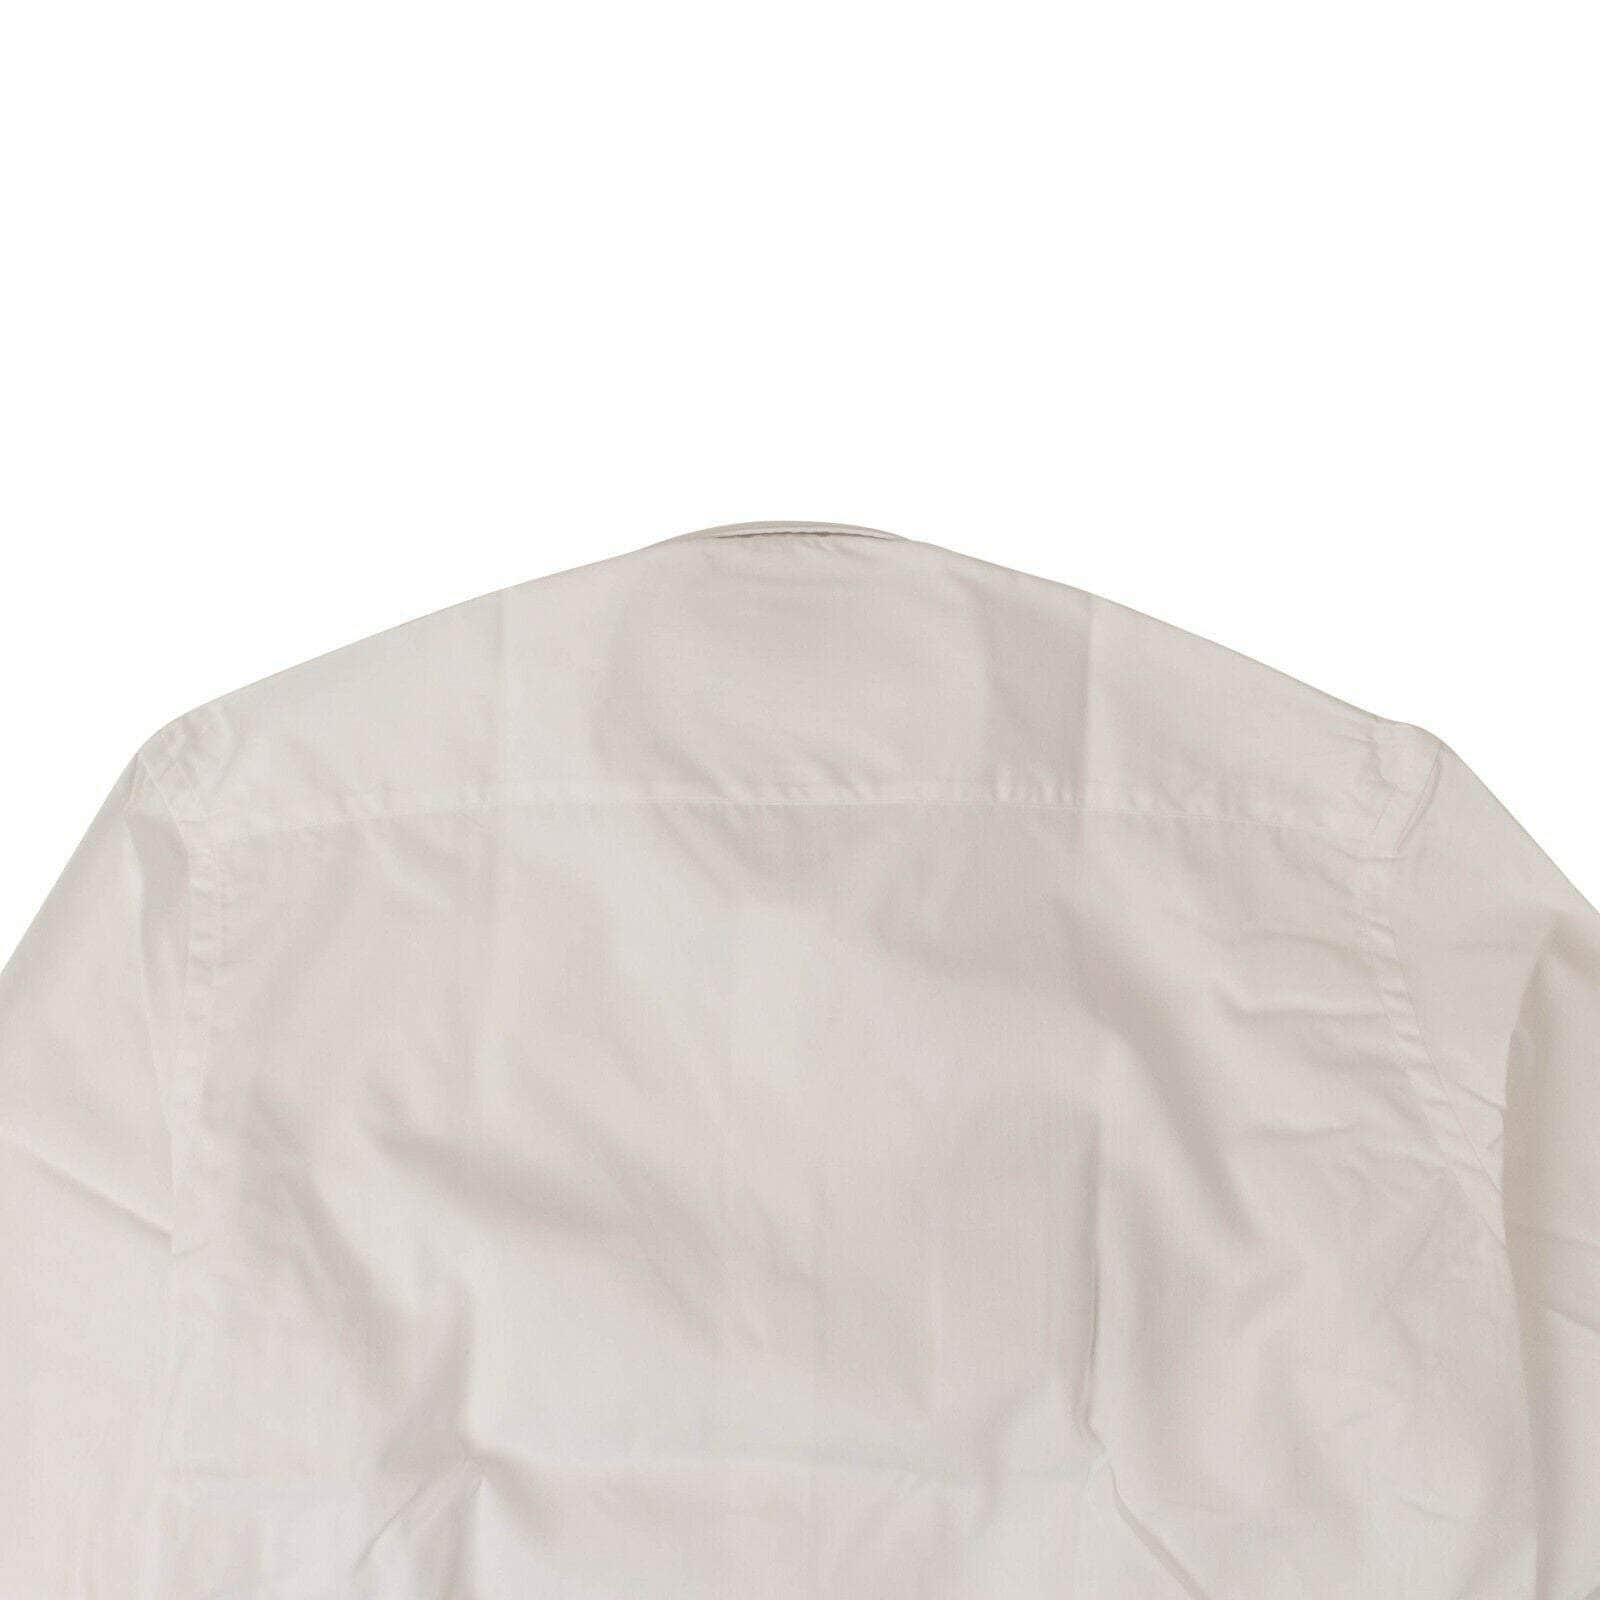 Burberry 250-500, burberry, channelenable-all, chicmi, couponcollection, gender-mens, main-clothing, newarrival2, size-38-eu, size-39-eu, size-41-eu Burberry Men's White Double Collar Shirt